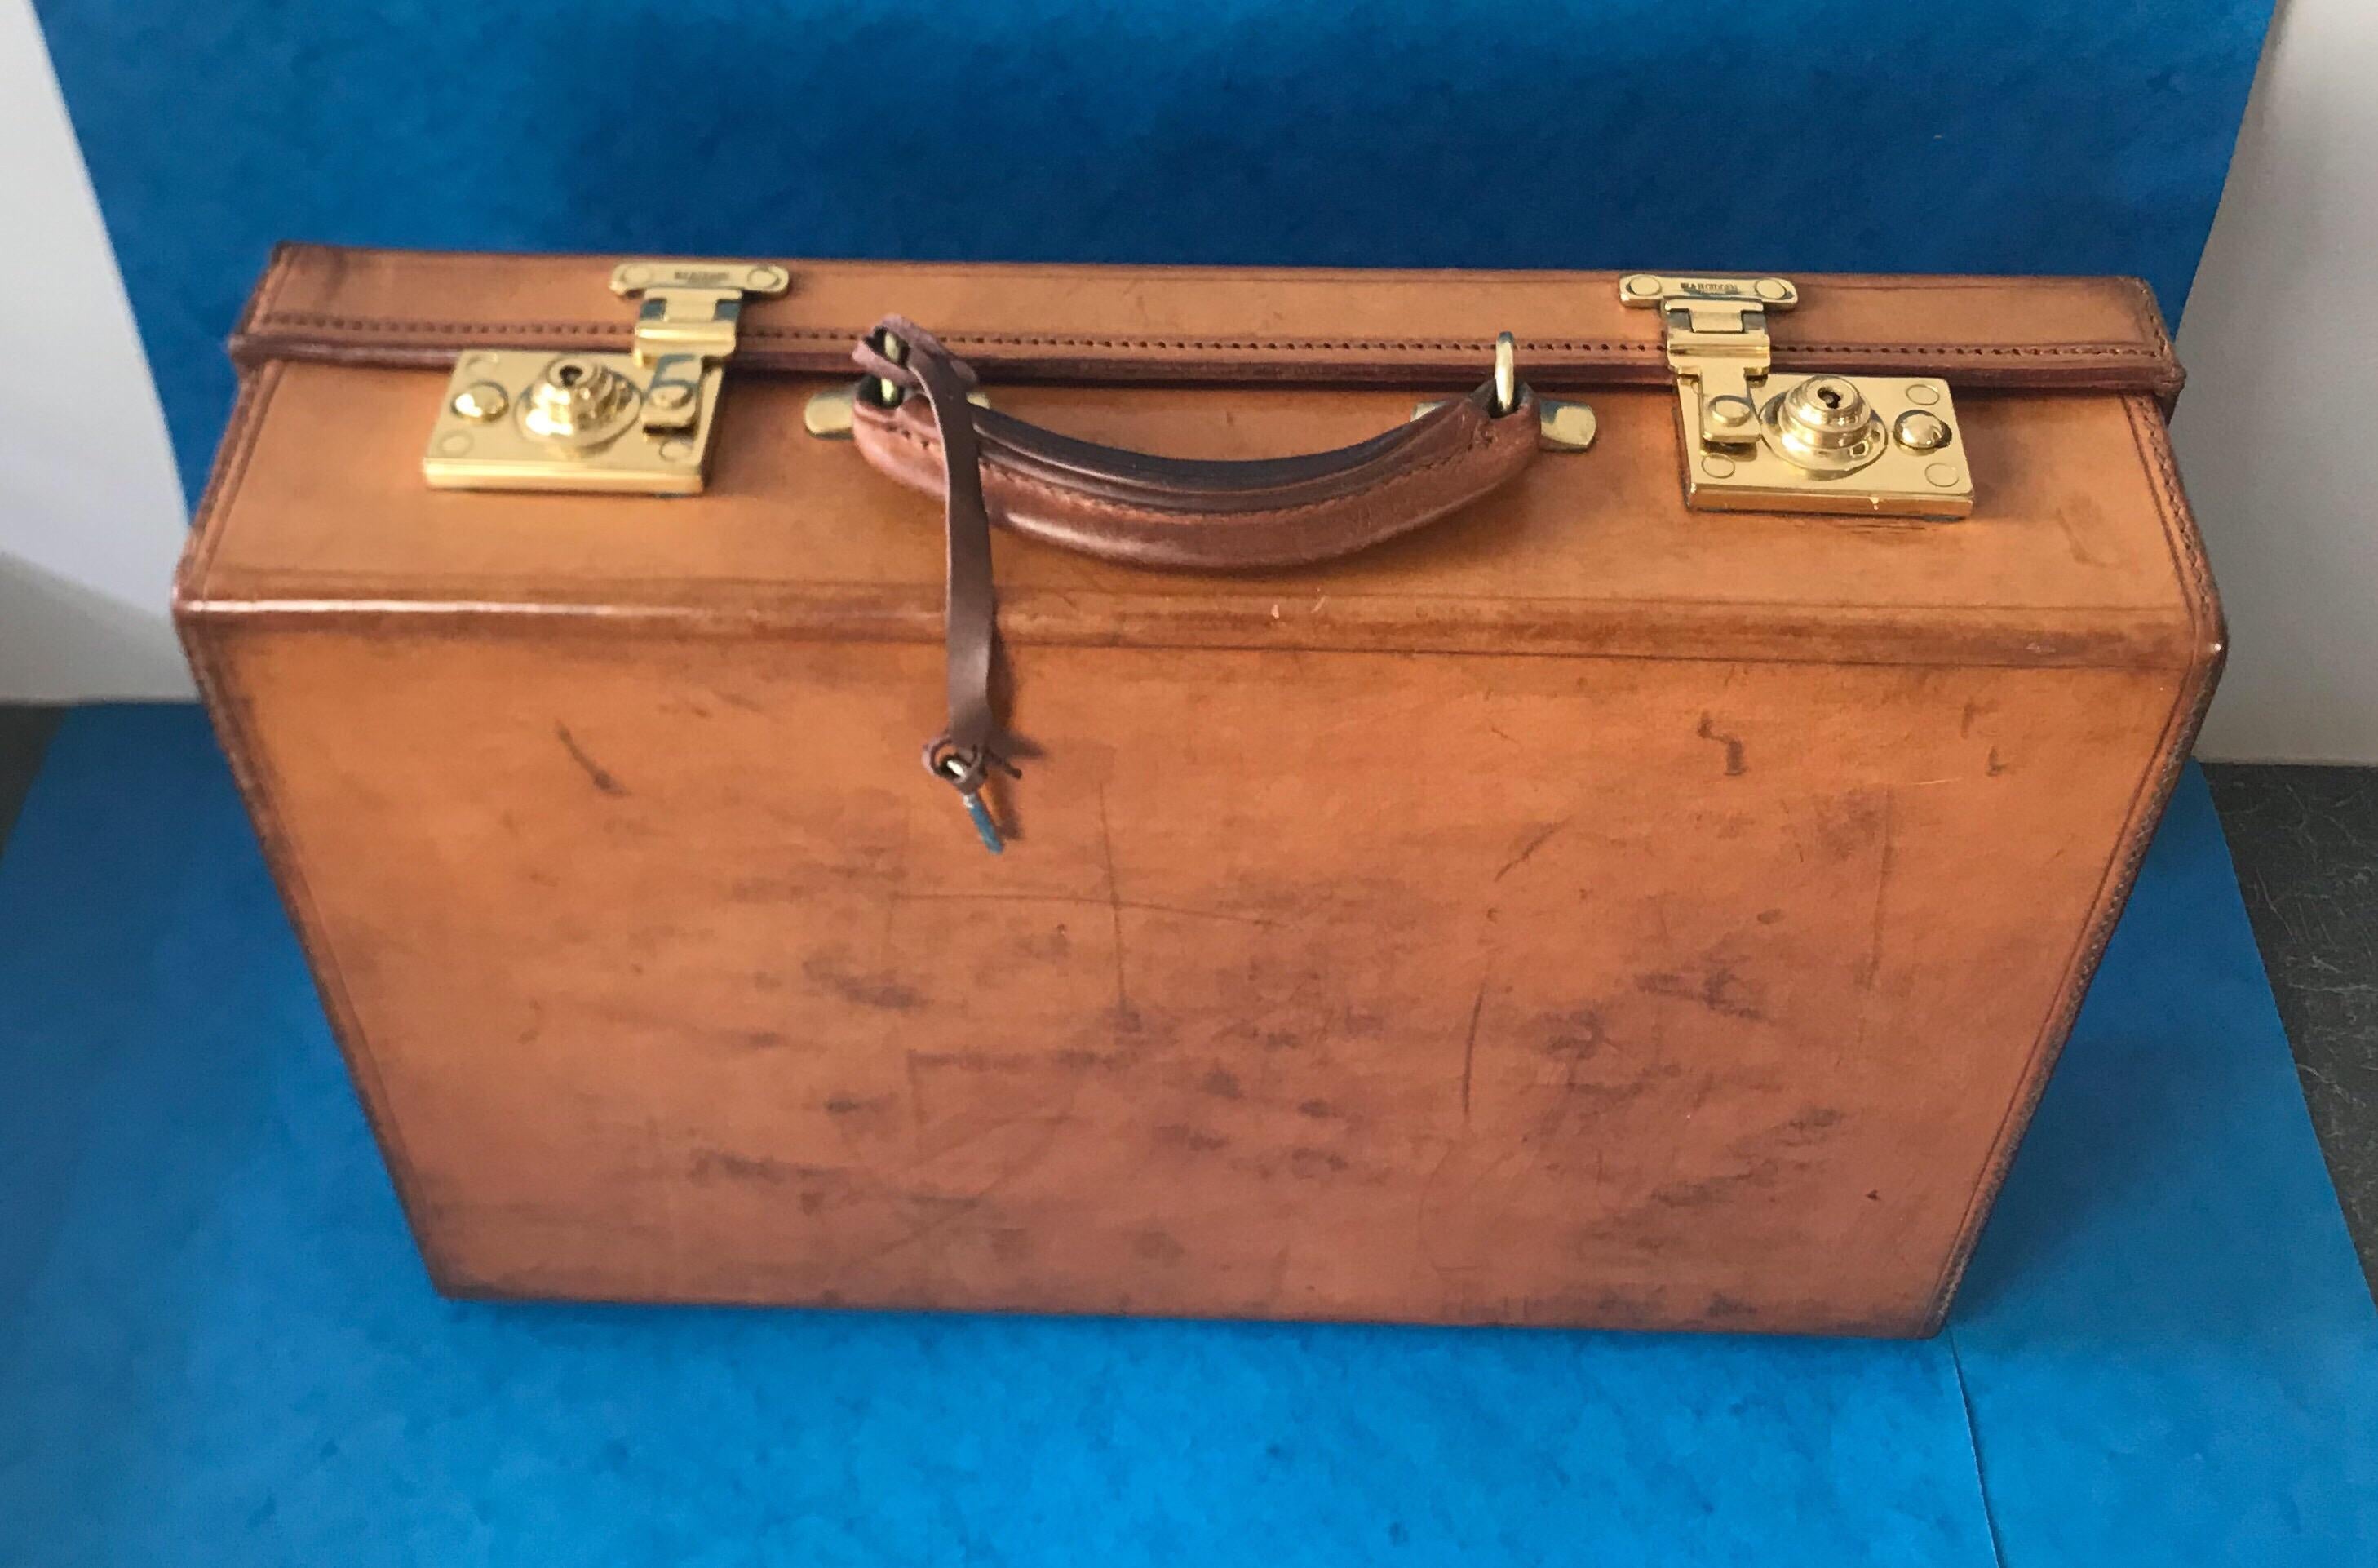 1960-1970 Hide Leather Attaché Case by “W & H Gidden” 2